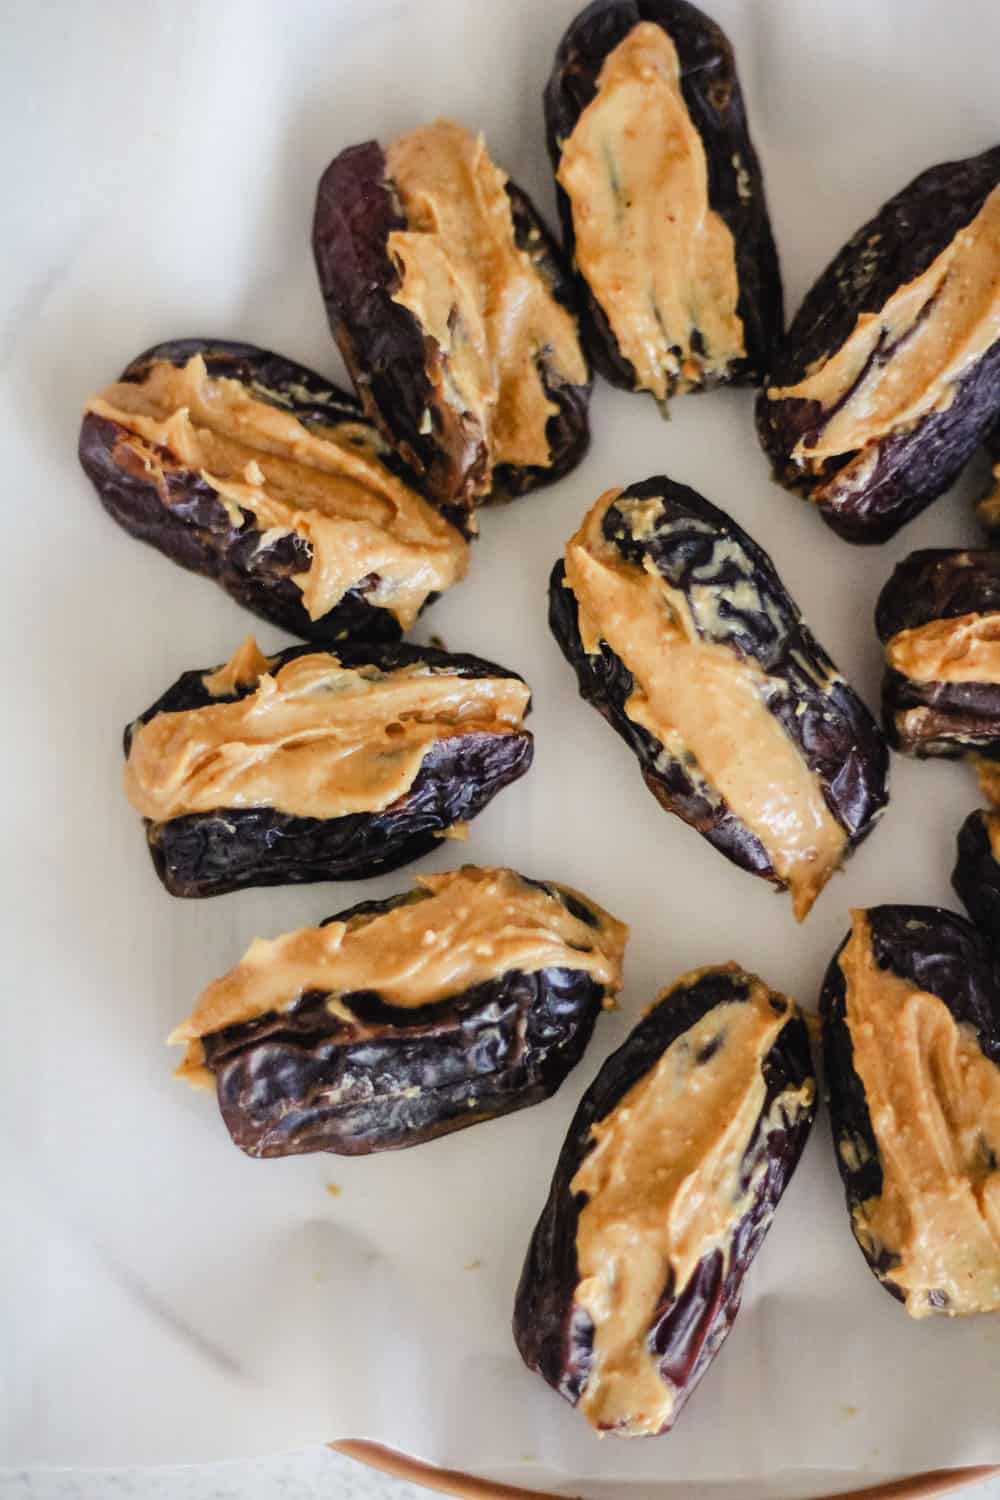 Dates stuffed with peanut butter on parchment paper.